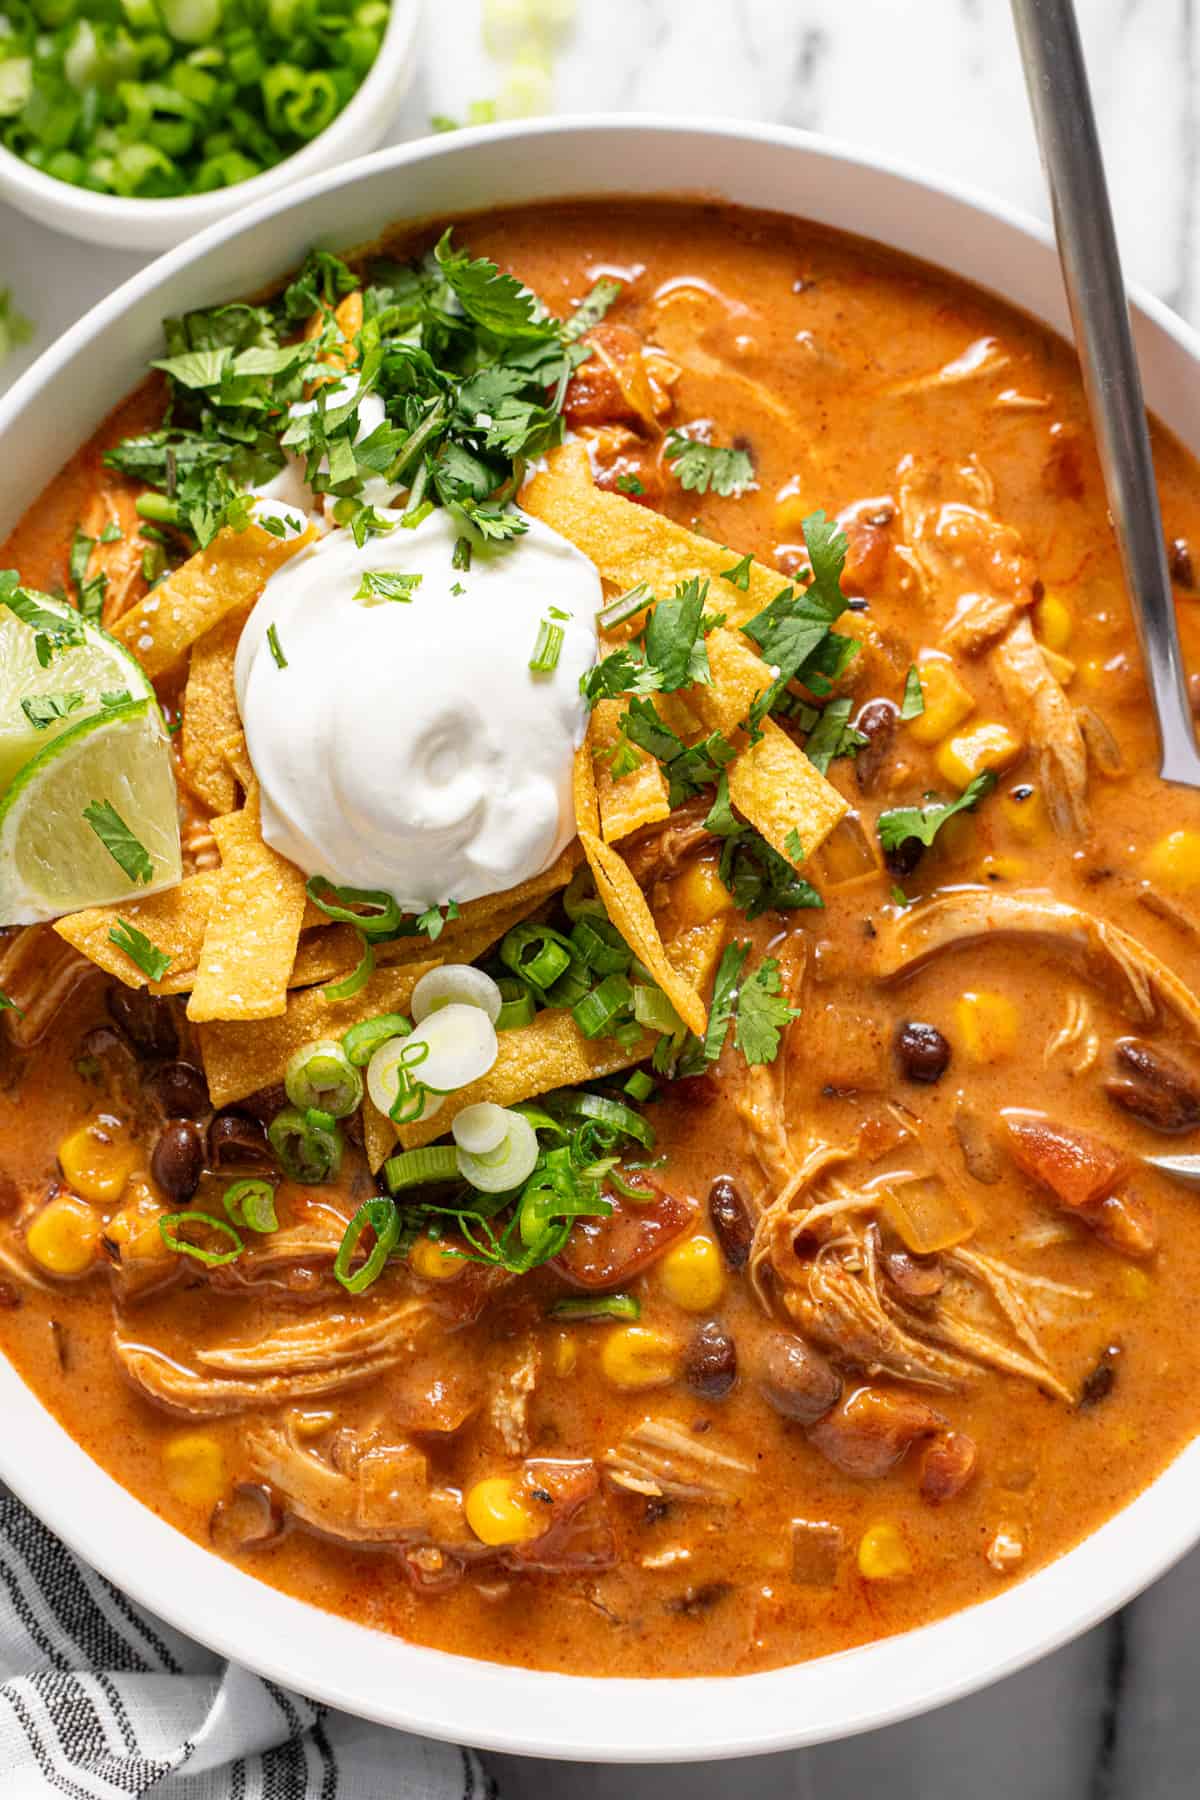 Large bowl of chicken enchilada soup topped with tortilla strips, sour cream, cilantro, and green onions.